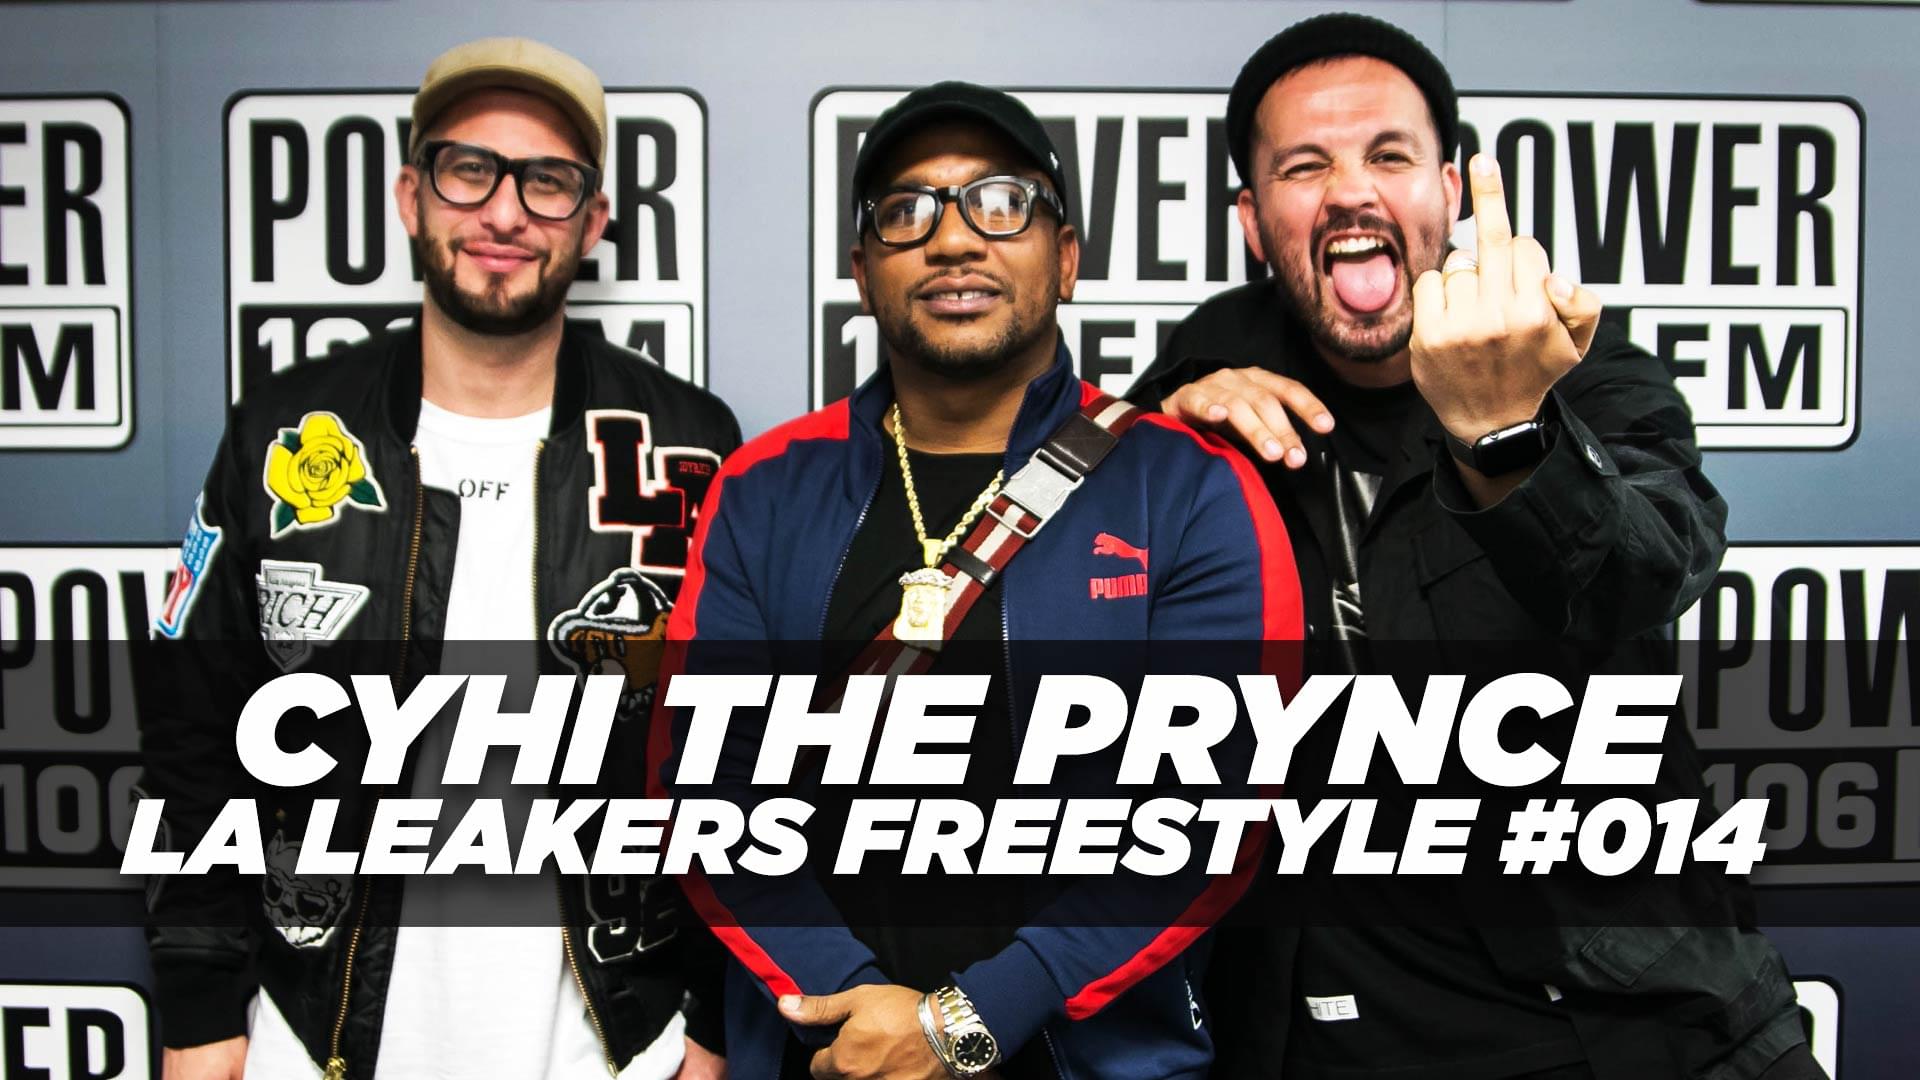 [EXCLUSIVE] Cyhi The Prynce LA Leakers Freestyle